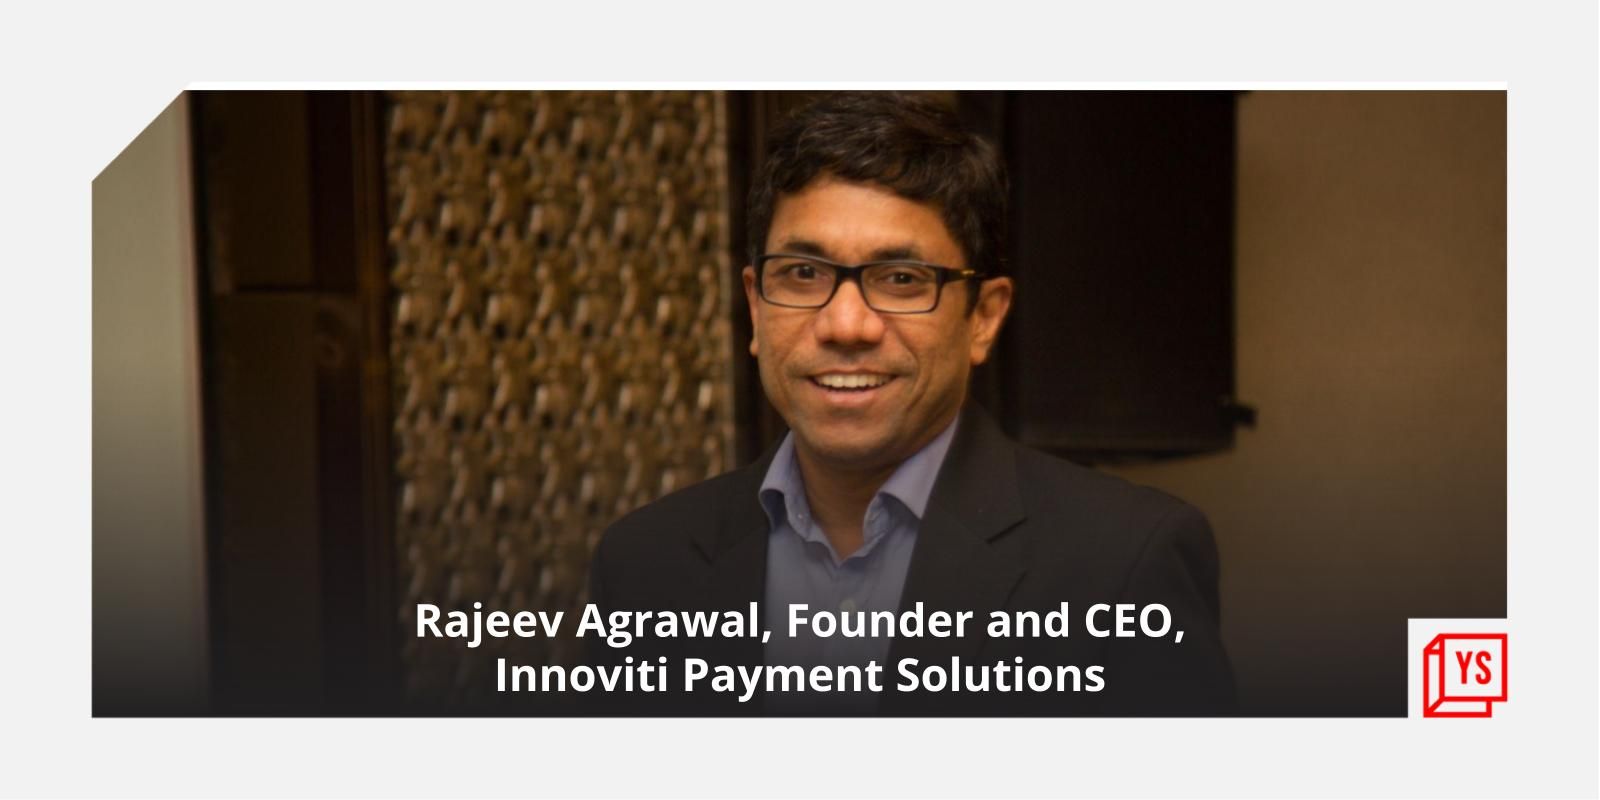 [Funding alert] Innoviti Payment Solutions raises Rs 80 Cr in ongoing Series D round